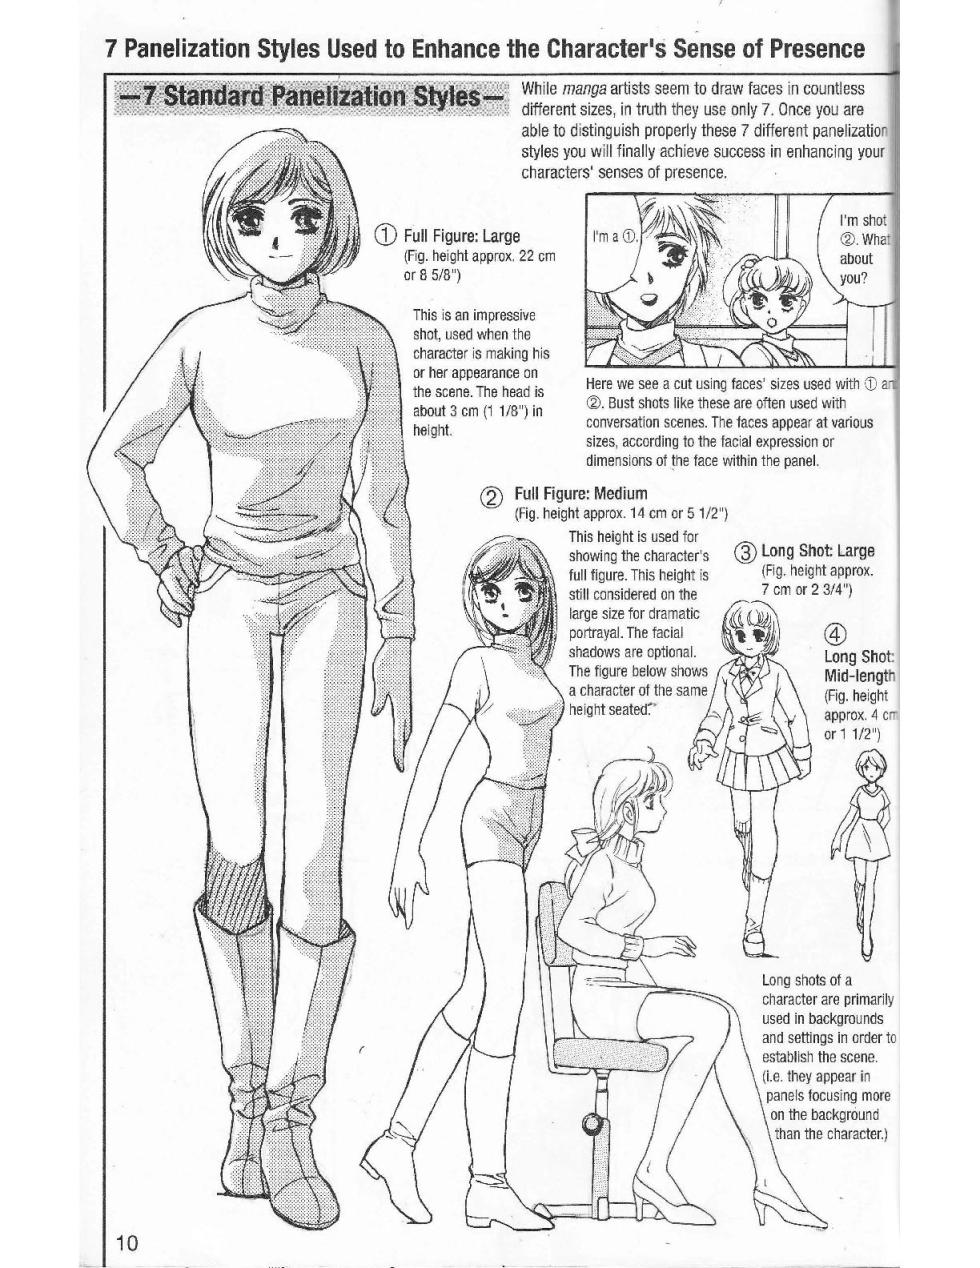 More How to Draw Manga Vol. 3 - Enhancing a Character's Sense of Presence - Page 12